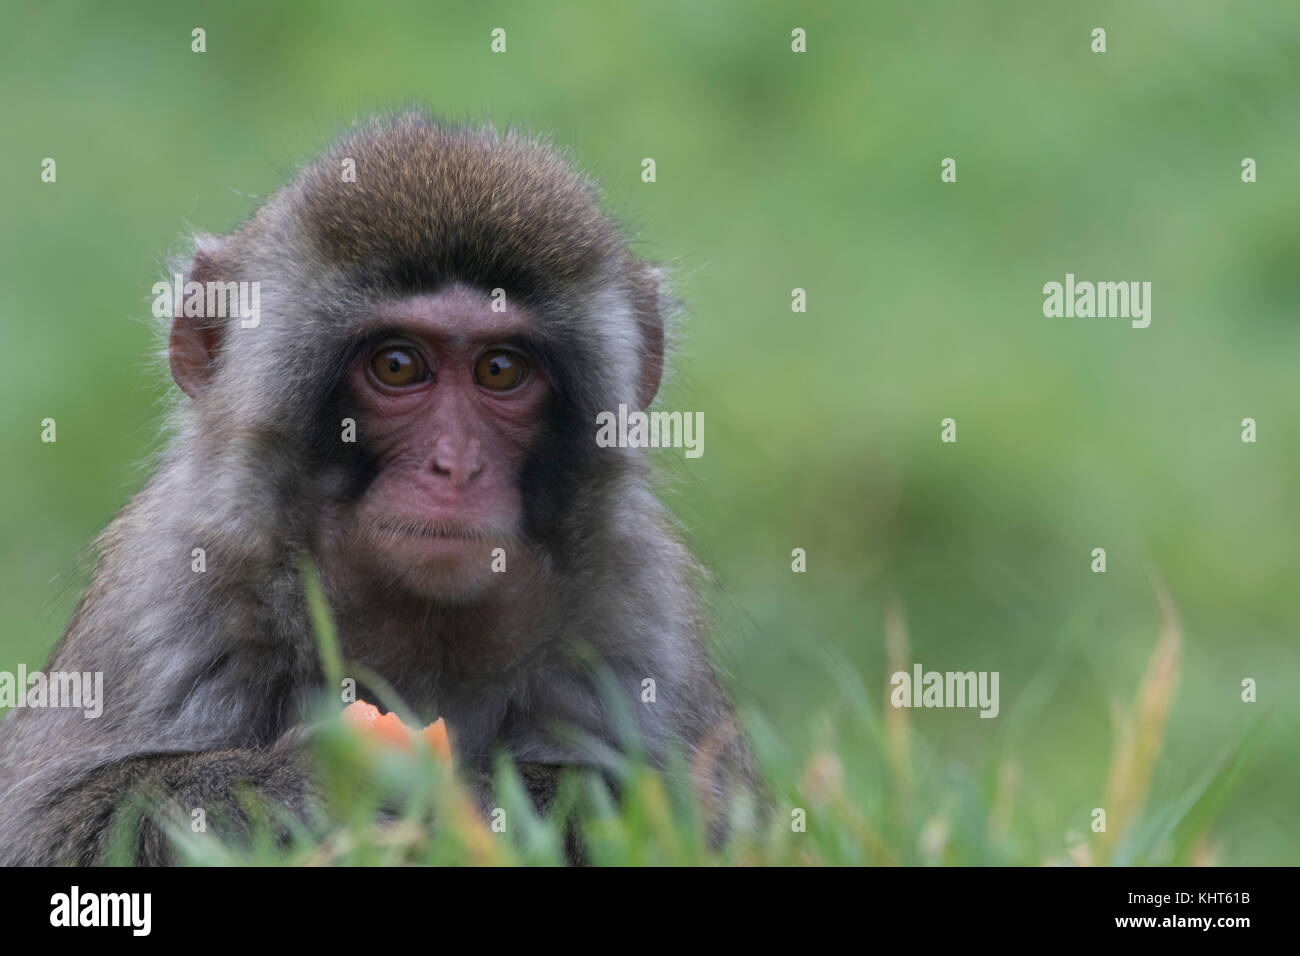 snow monkeys, Japanese macaque, Macaca fuscata, captive, young, old, close up portraits alone and in family group with blurred background Stock Photo